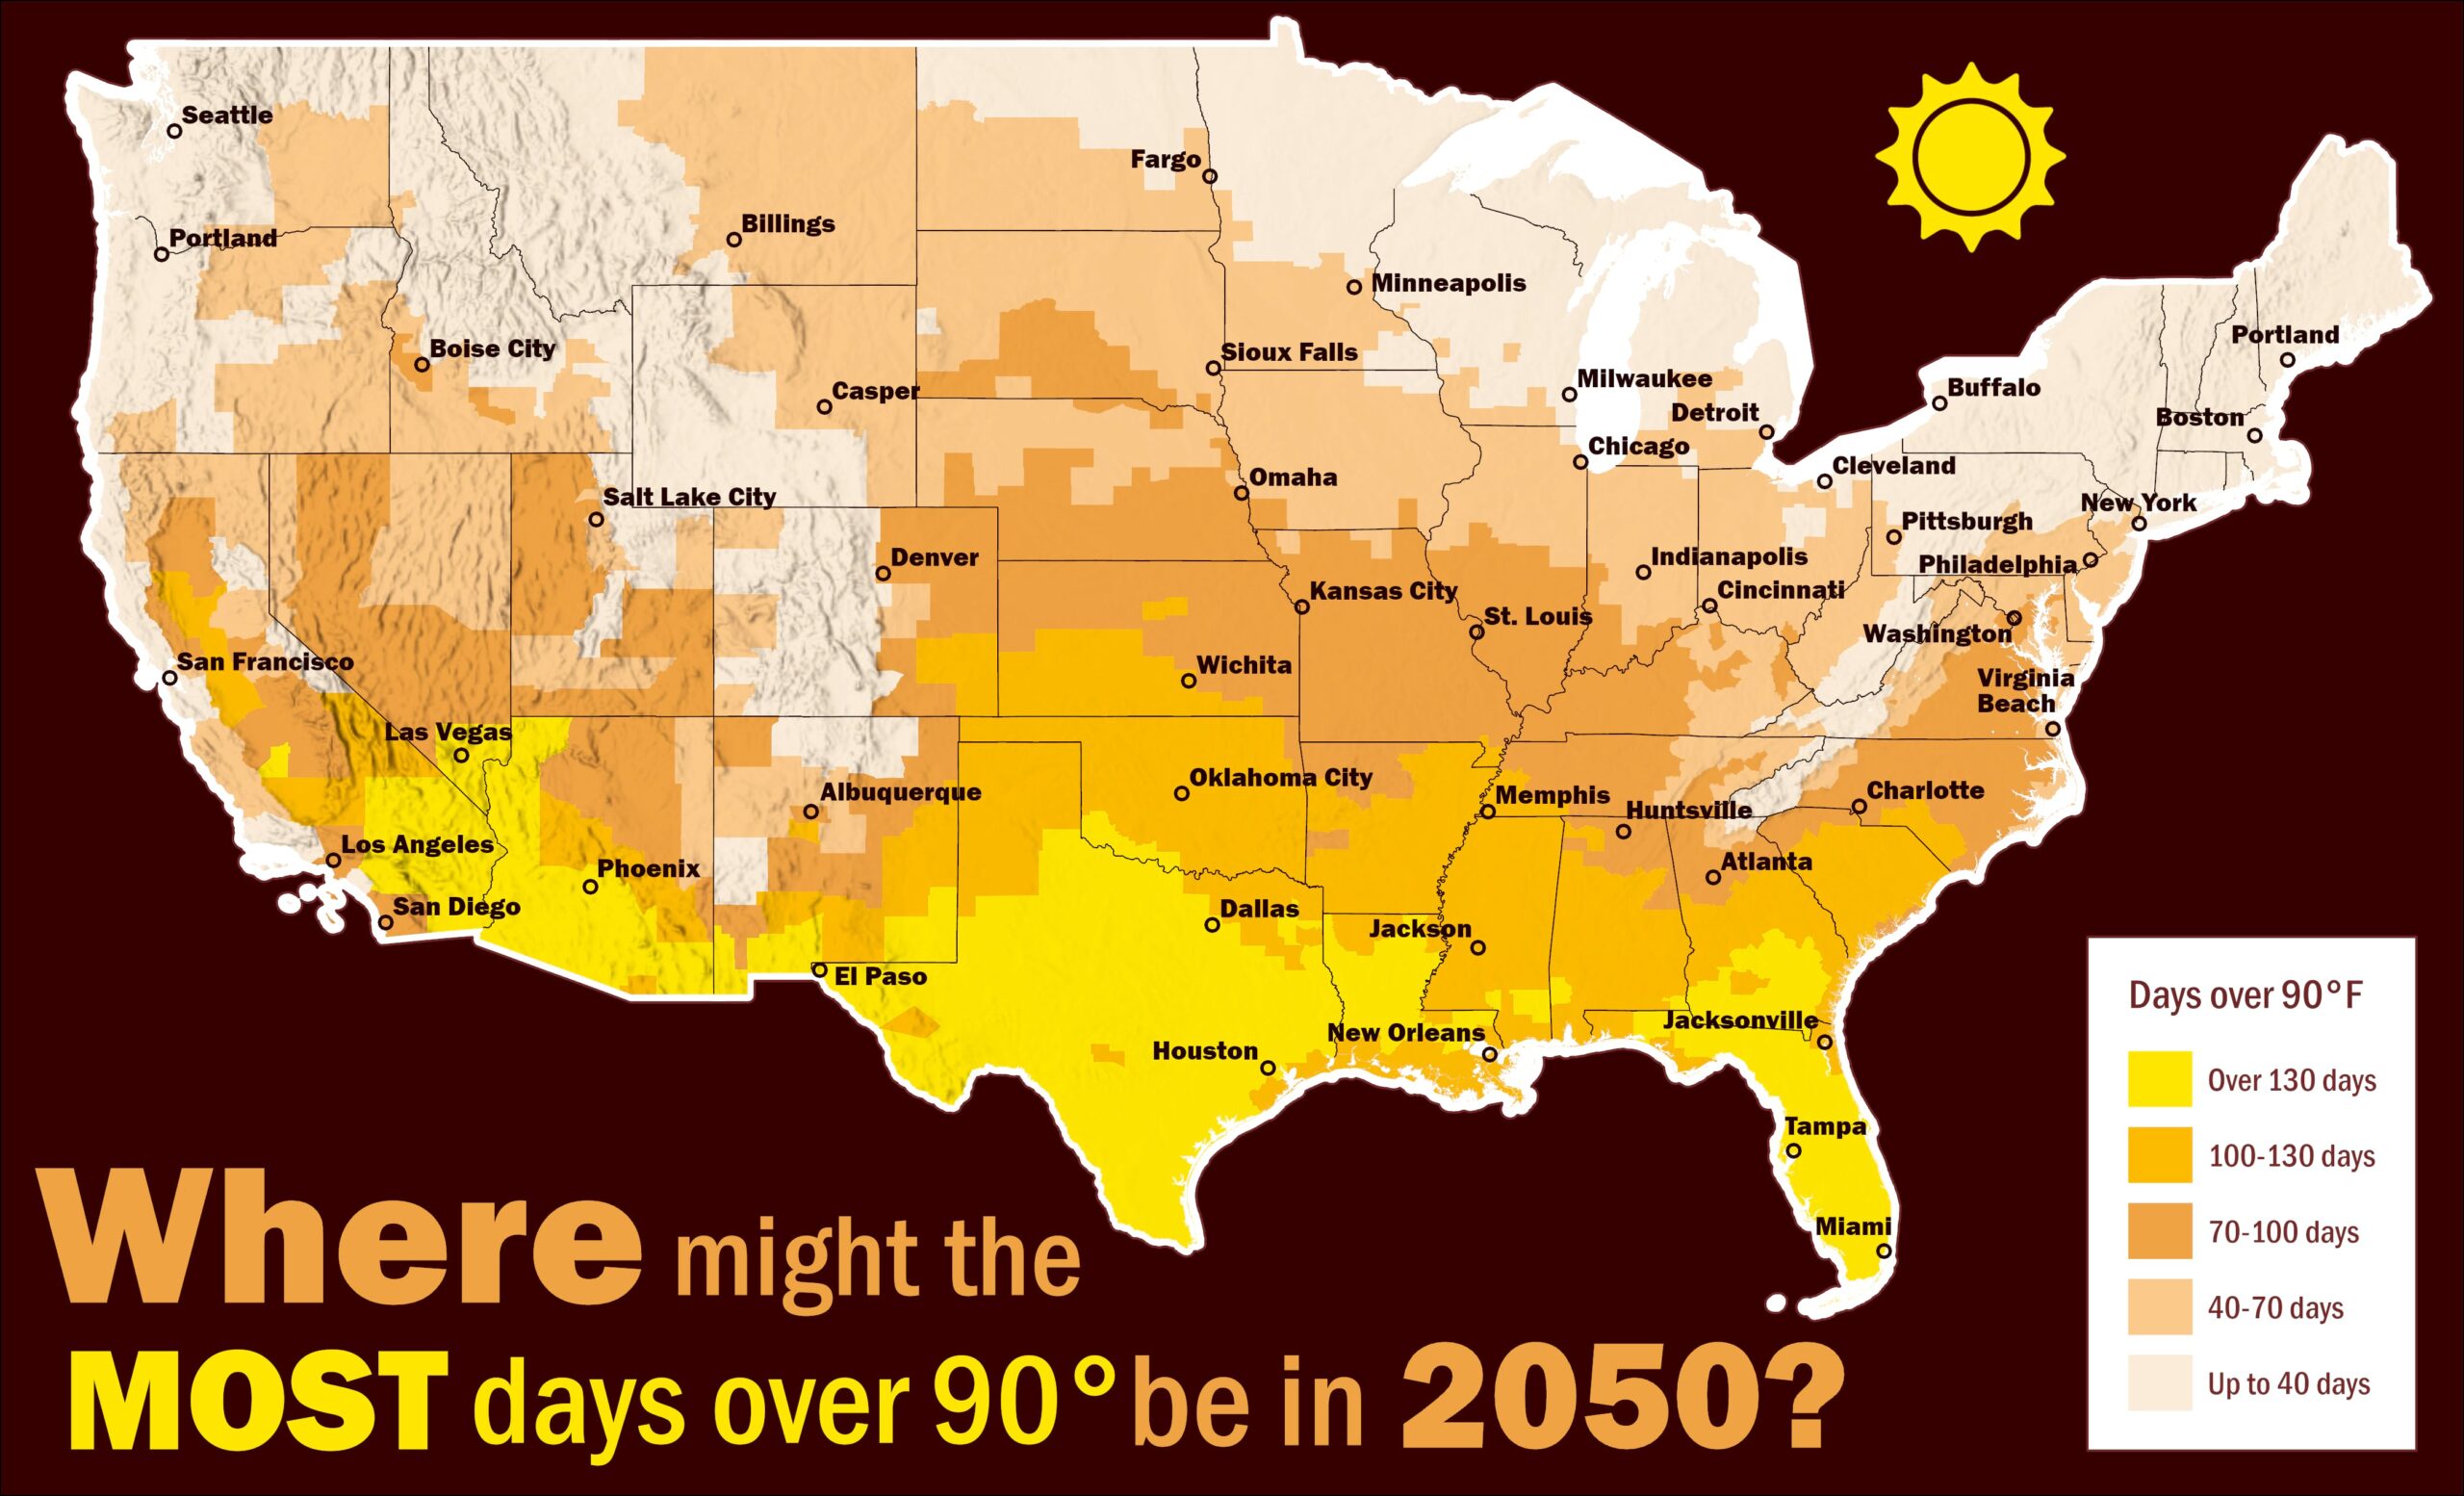 Total days with maximum temperature over 90°F projected in the year 2050 under the high emissions scenario (SSP5-8.5). Days over 90°F shows where heat could be most dangerous, and this type of extreme heat is concentrated in the southern portion of the U.S.